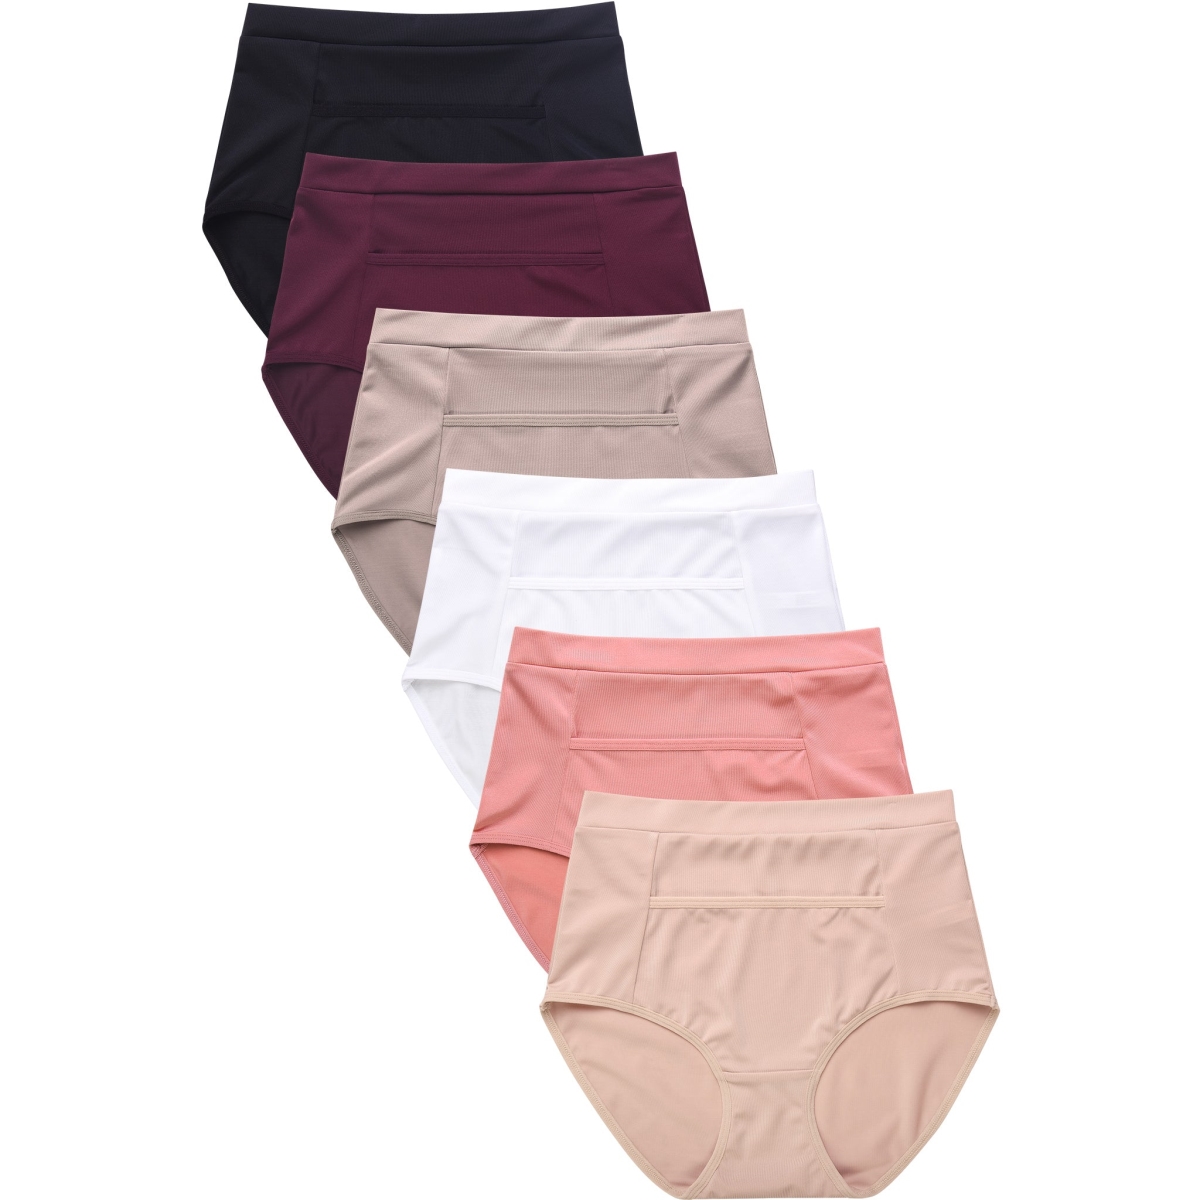 Picture of 247 Frenzy 247-GL7180-MD Sofra Womens Essentials Shapewear Control Panty Underwear - Assorted Color - Medium - Pack of 6